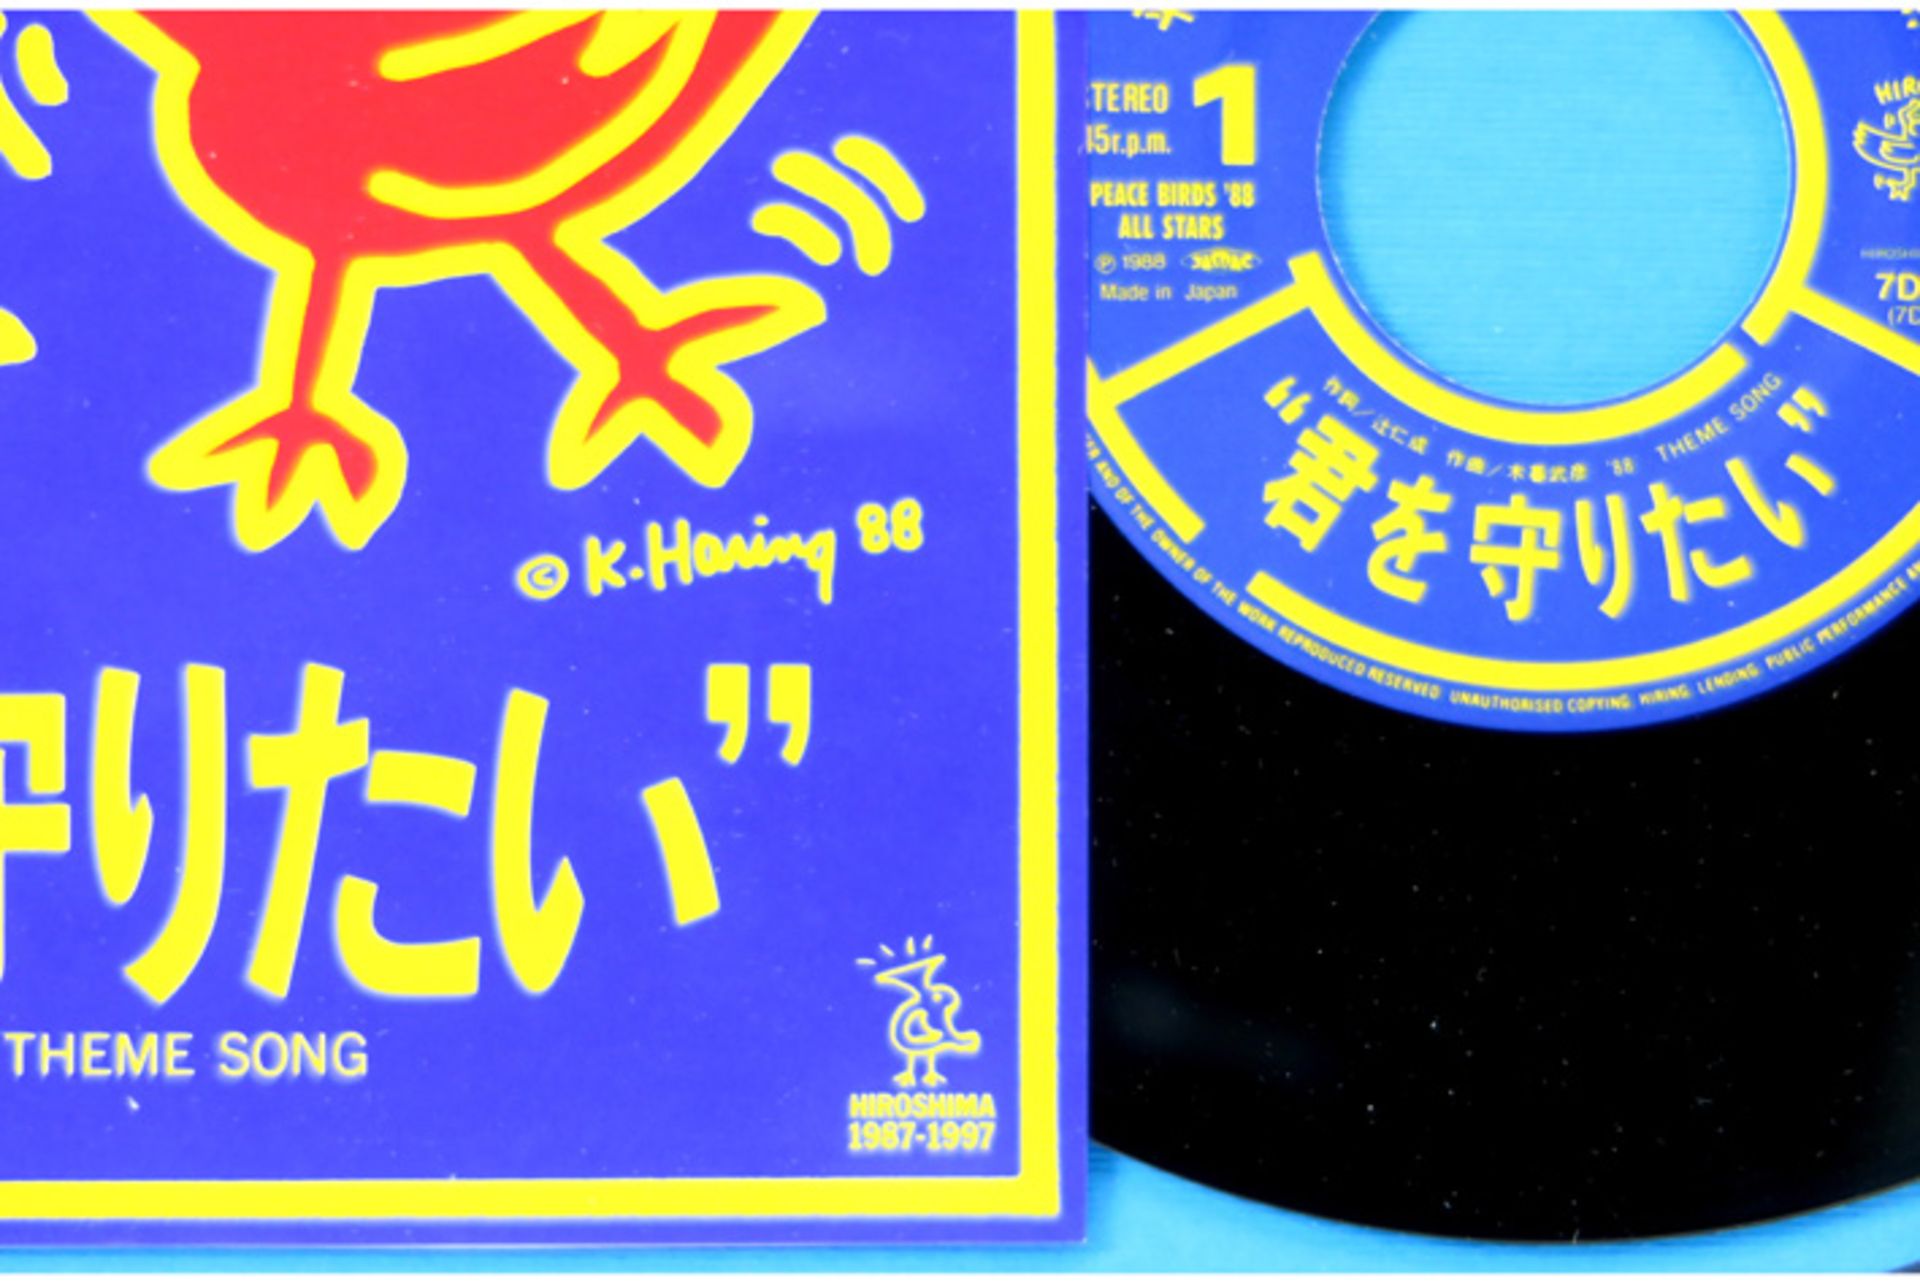 Japanese edition of the record cover designed by Keith Haring for and with the record "Peace - Bild 2 aus 2